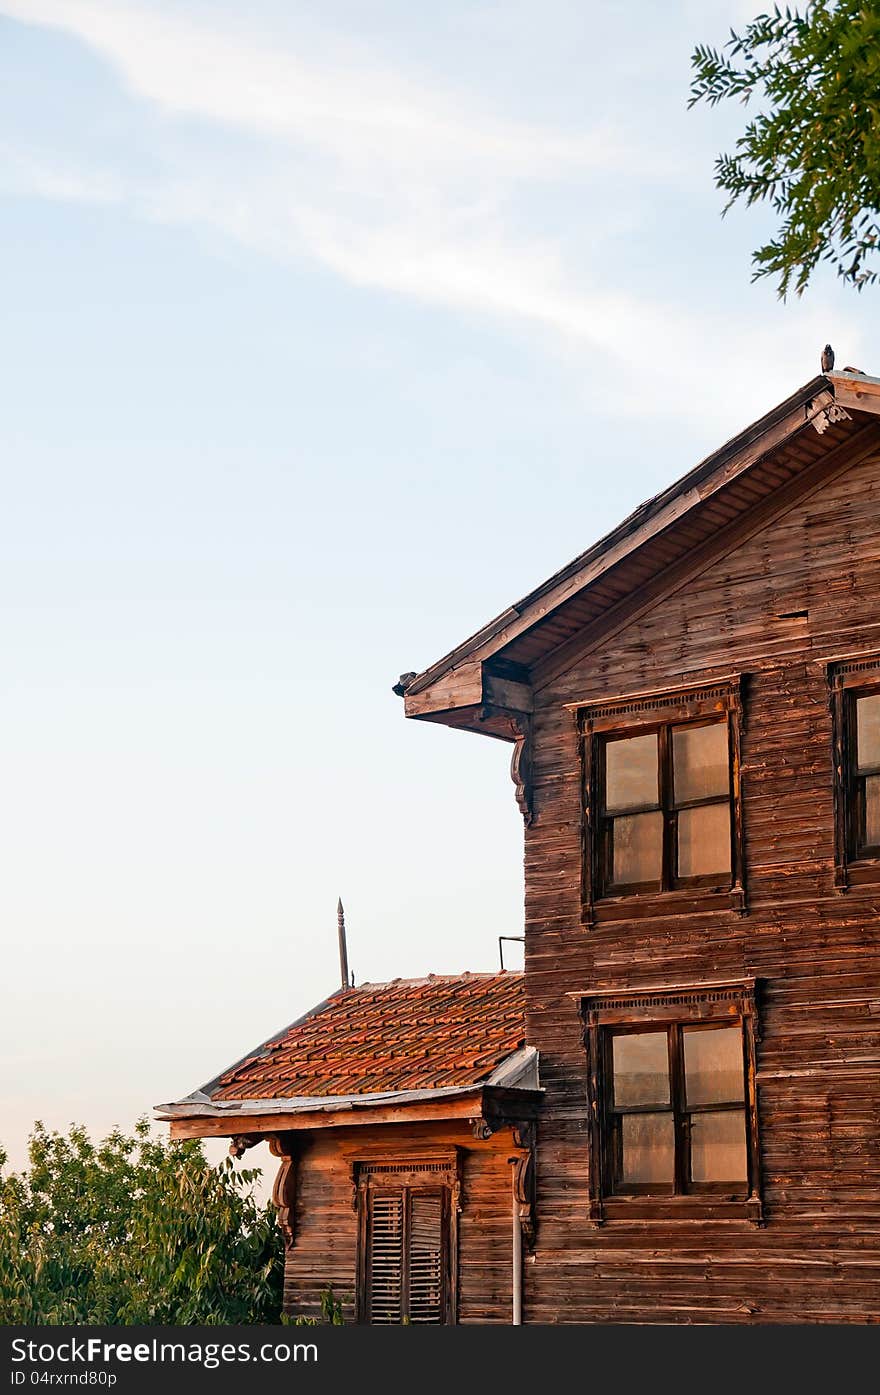 Vertical photo of a wooden house against blue sky.